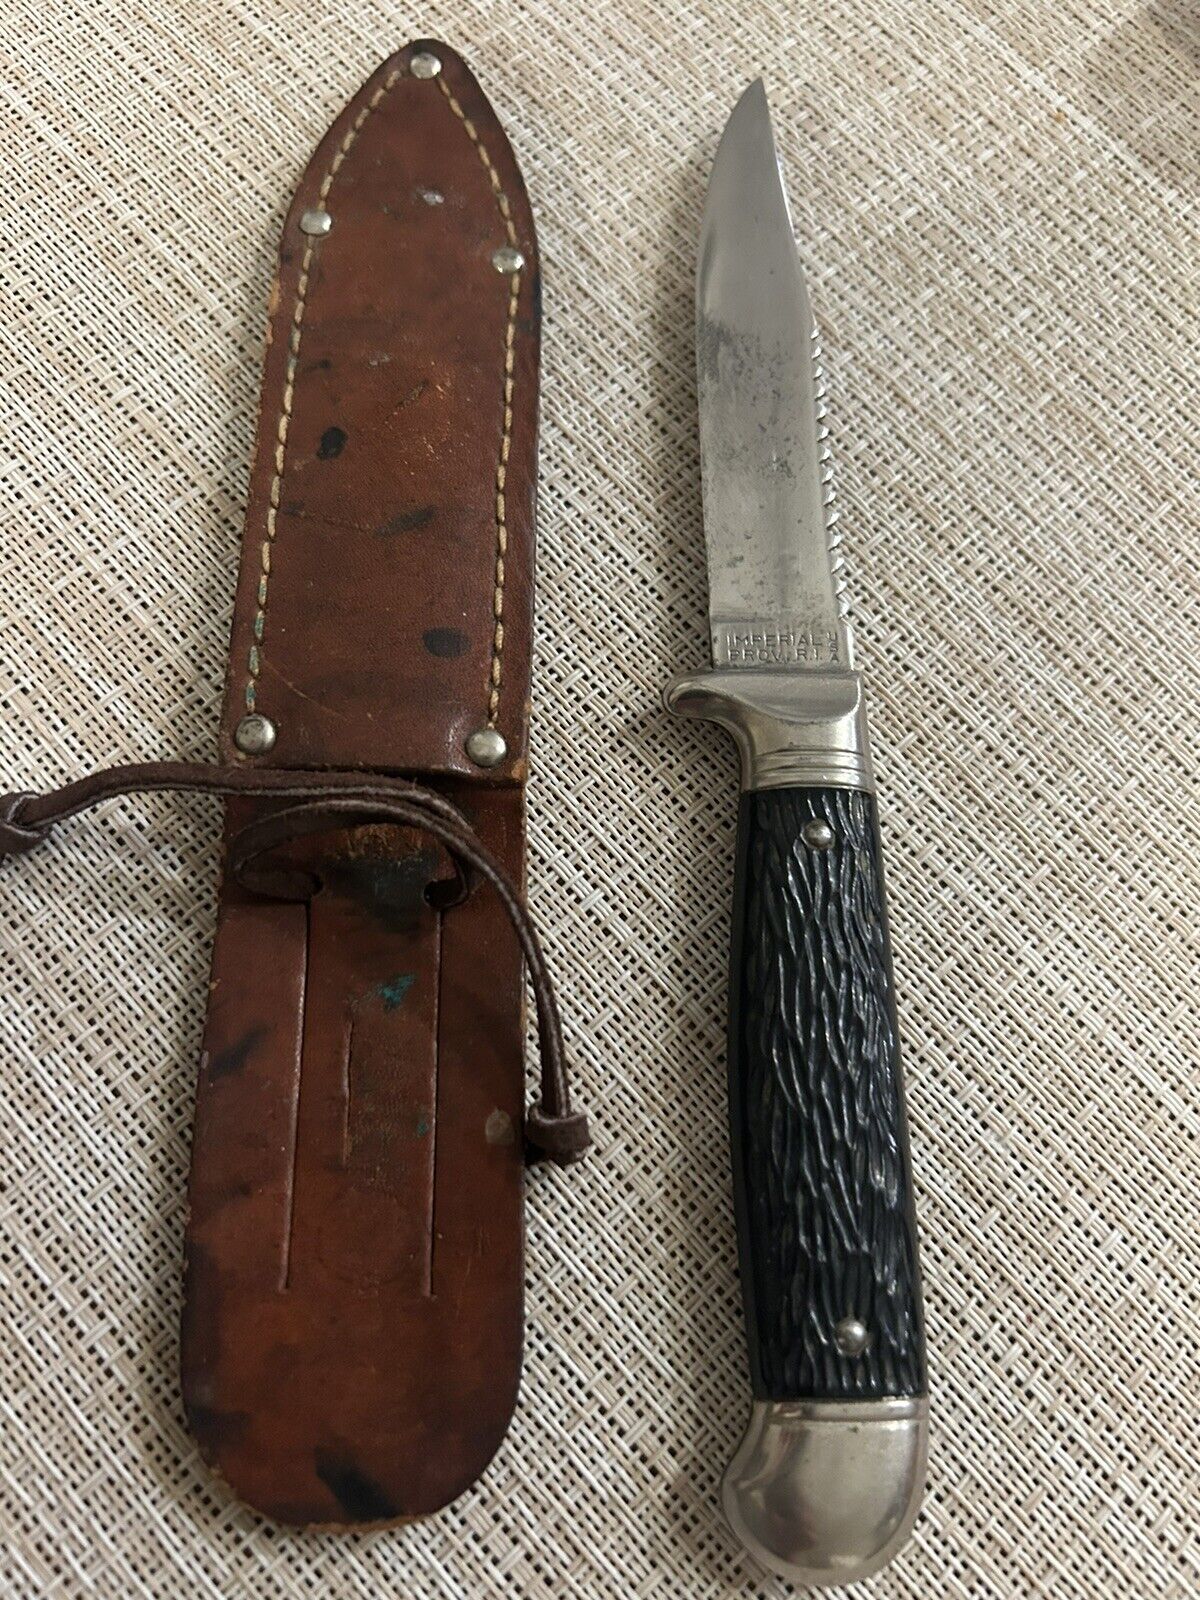 Imperial knife & sheath - vintage fixed blade - Made In Providence Rhode Island